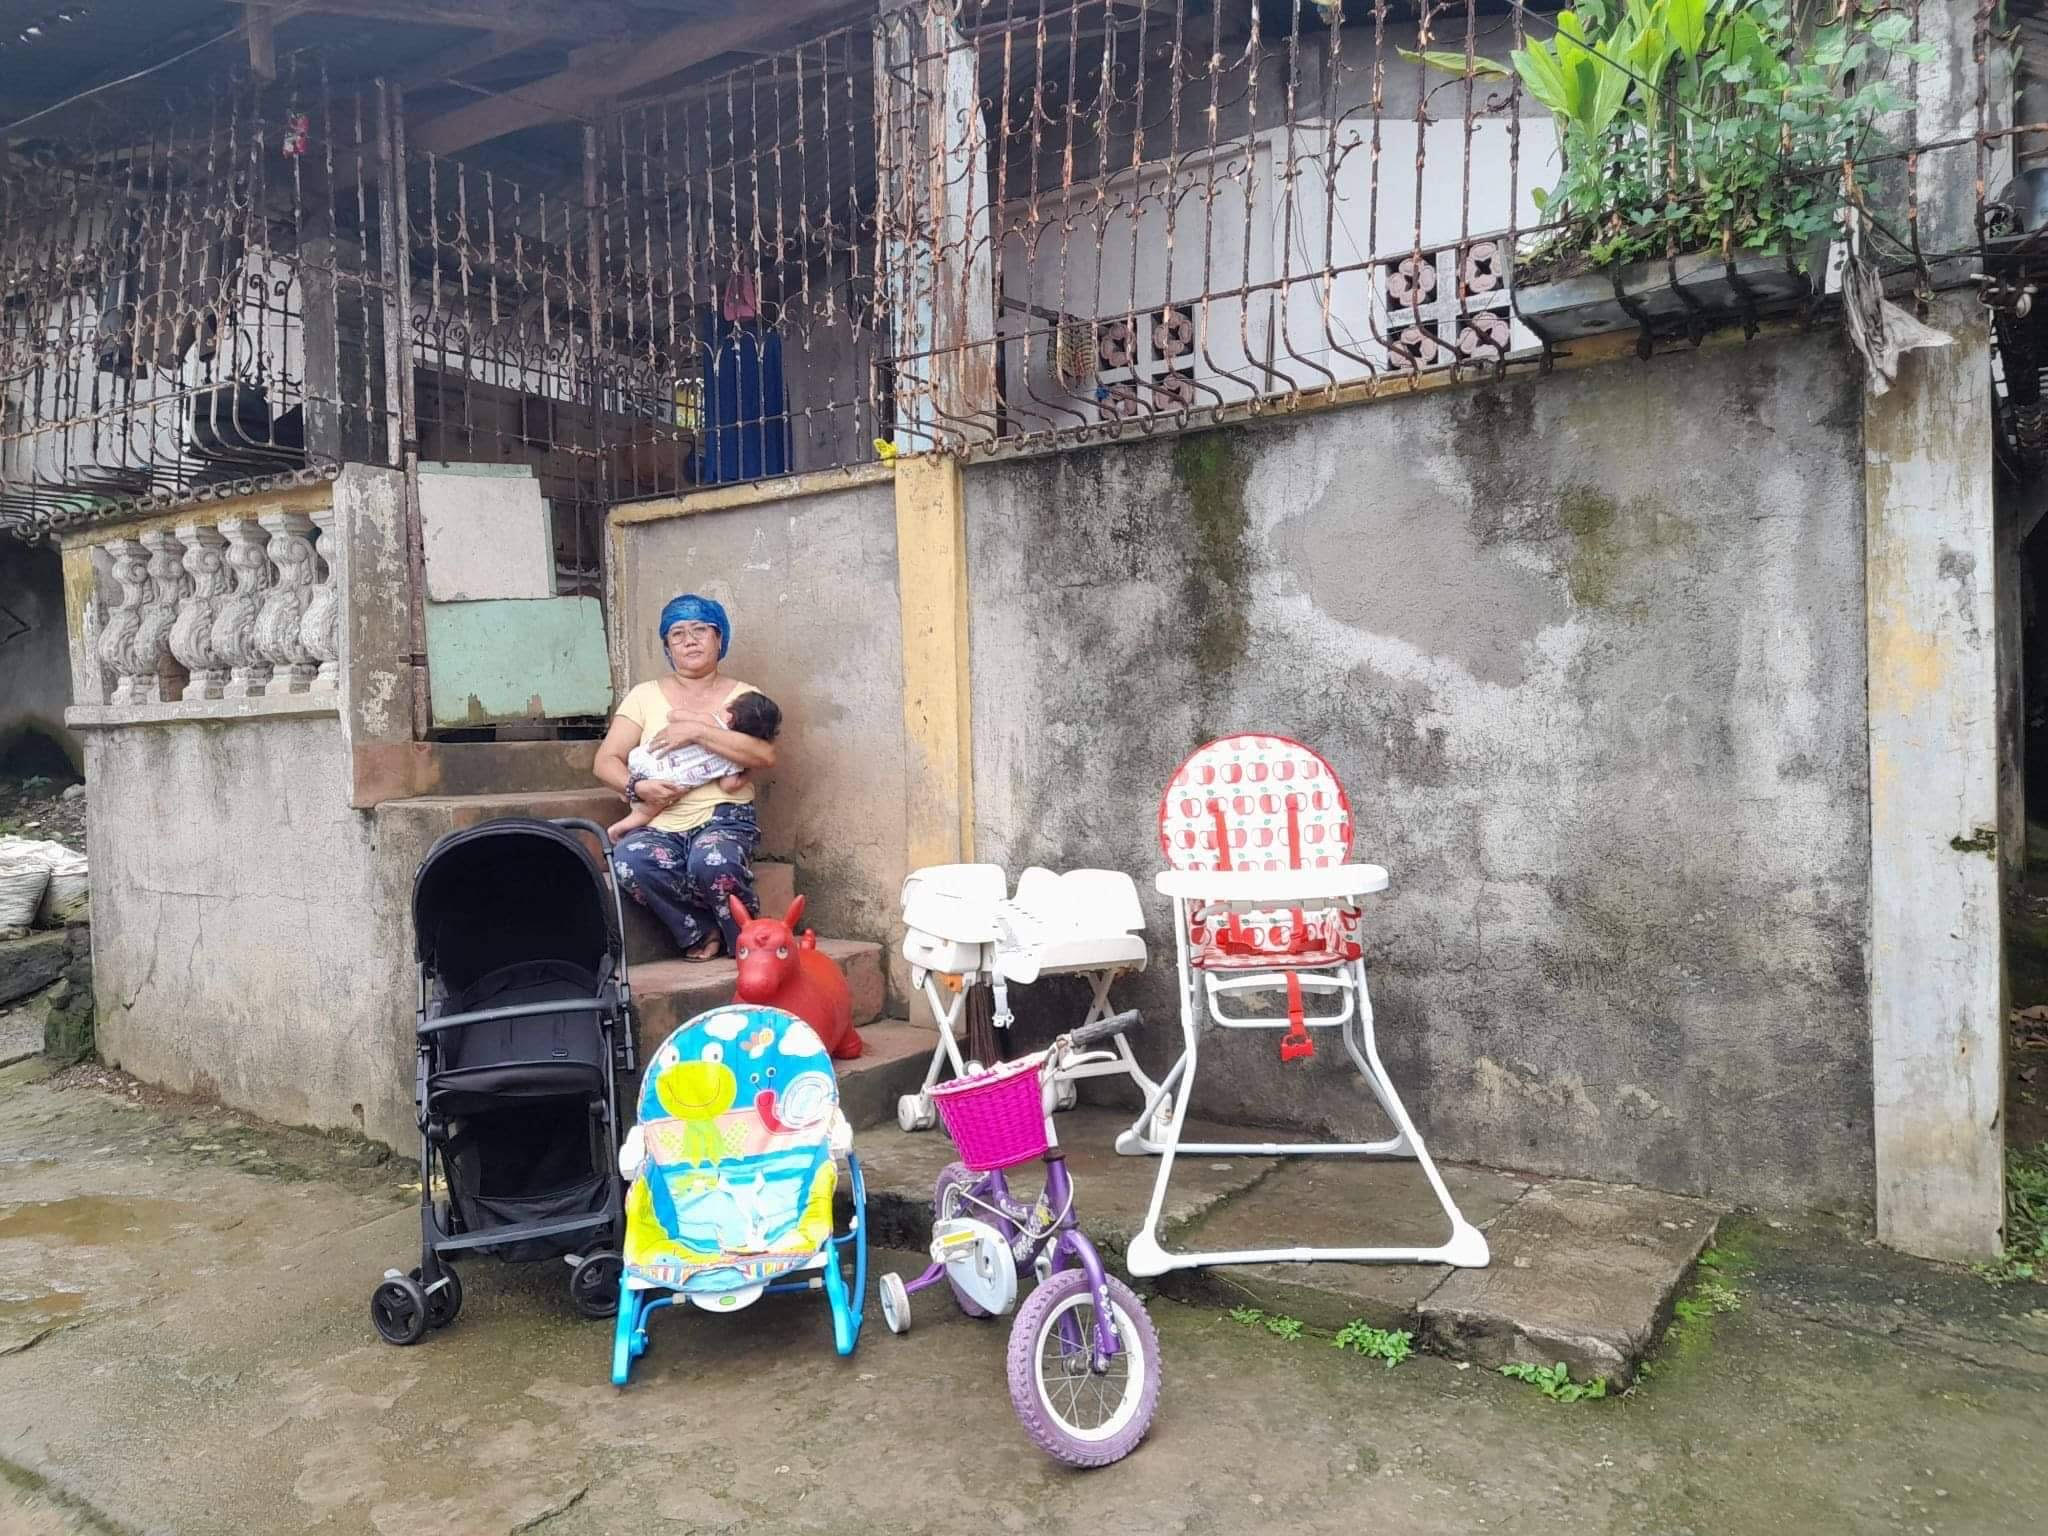 Rosa with baby and baby gear in the philippines